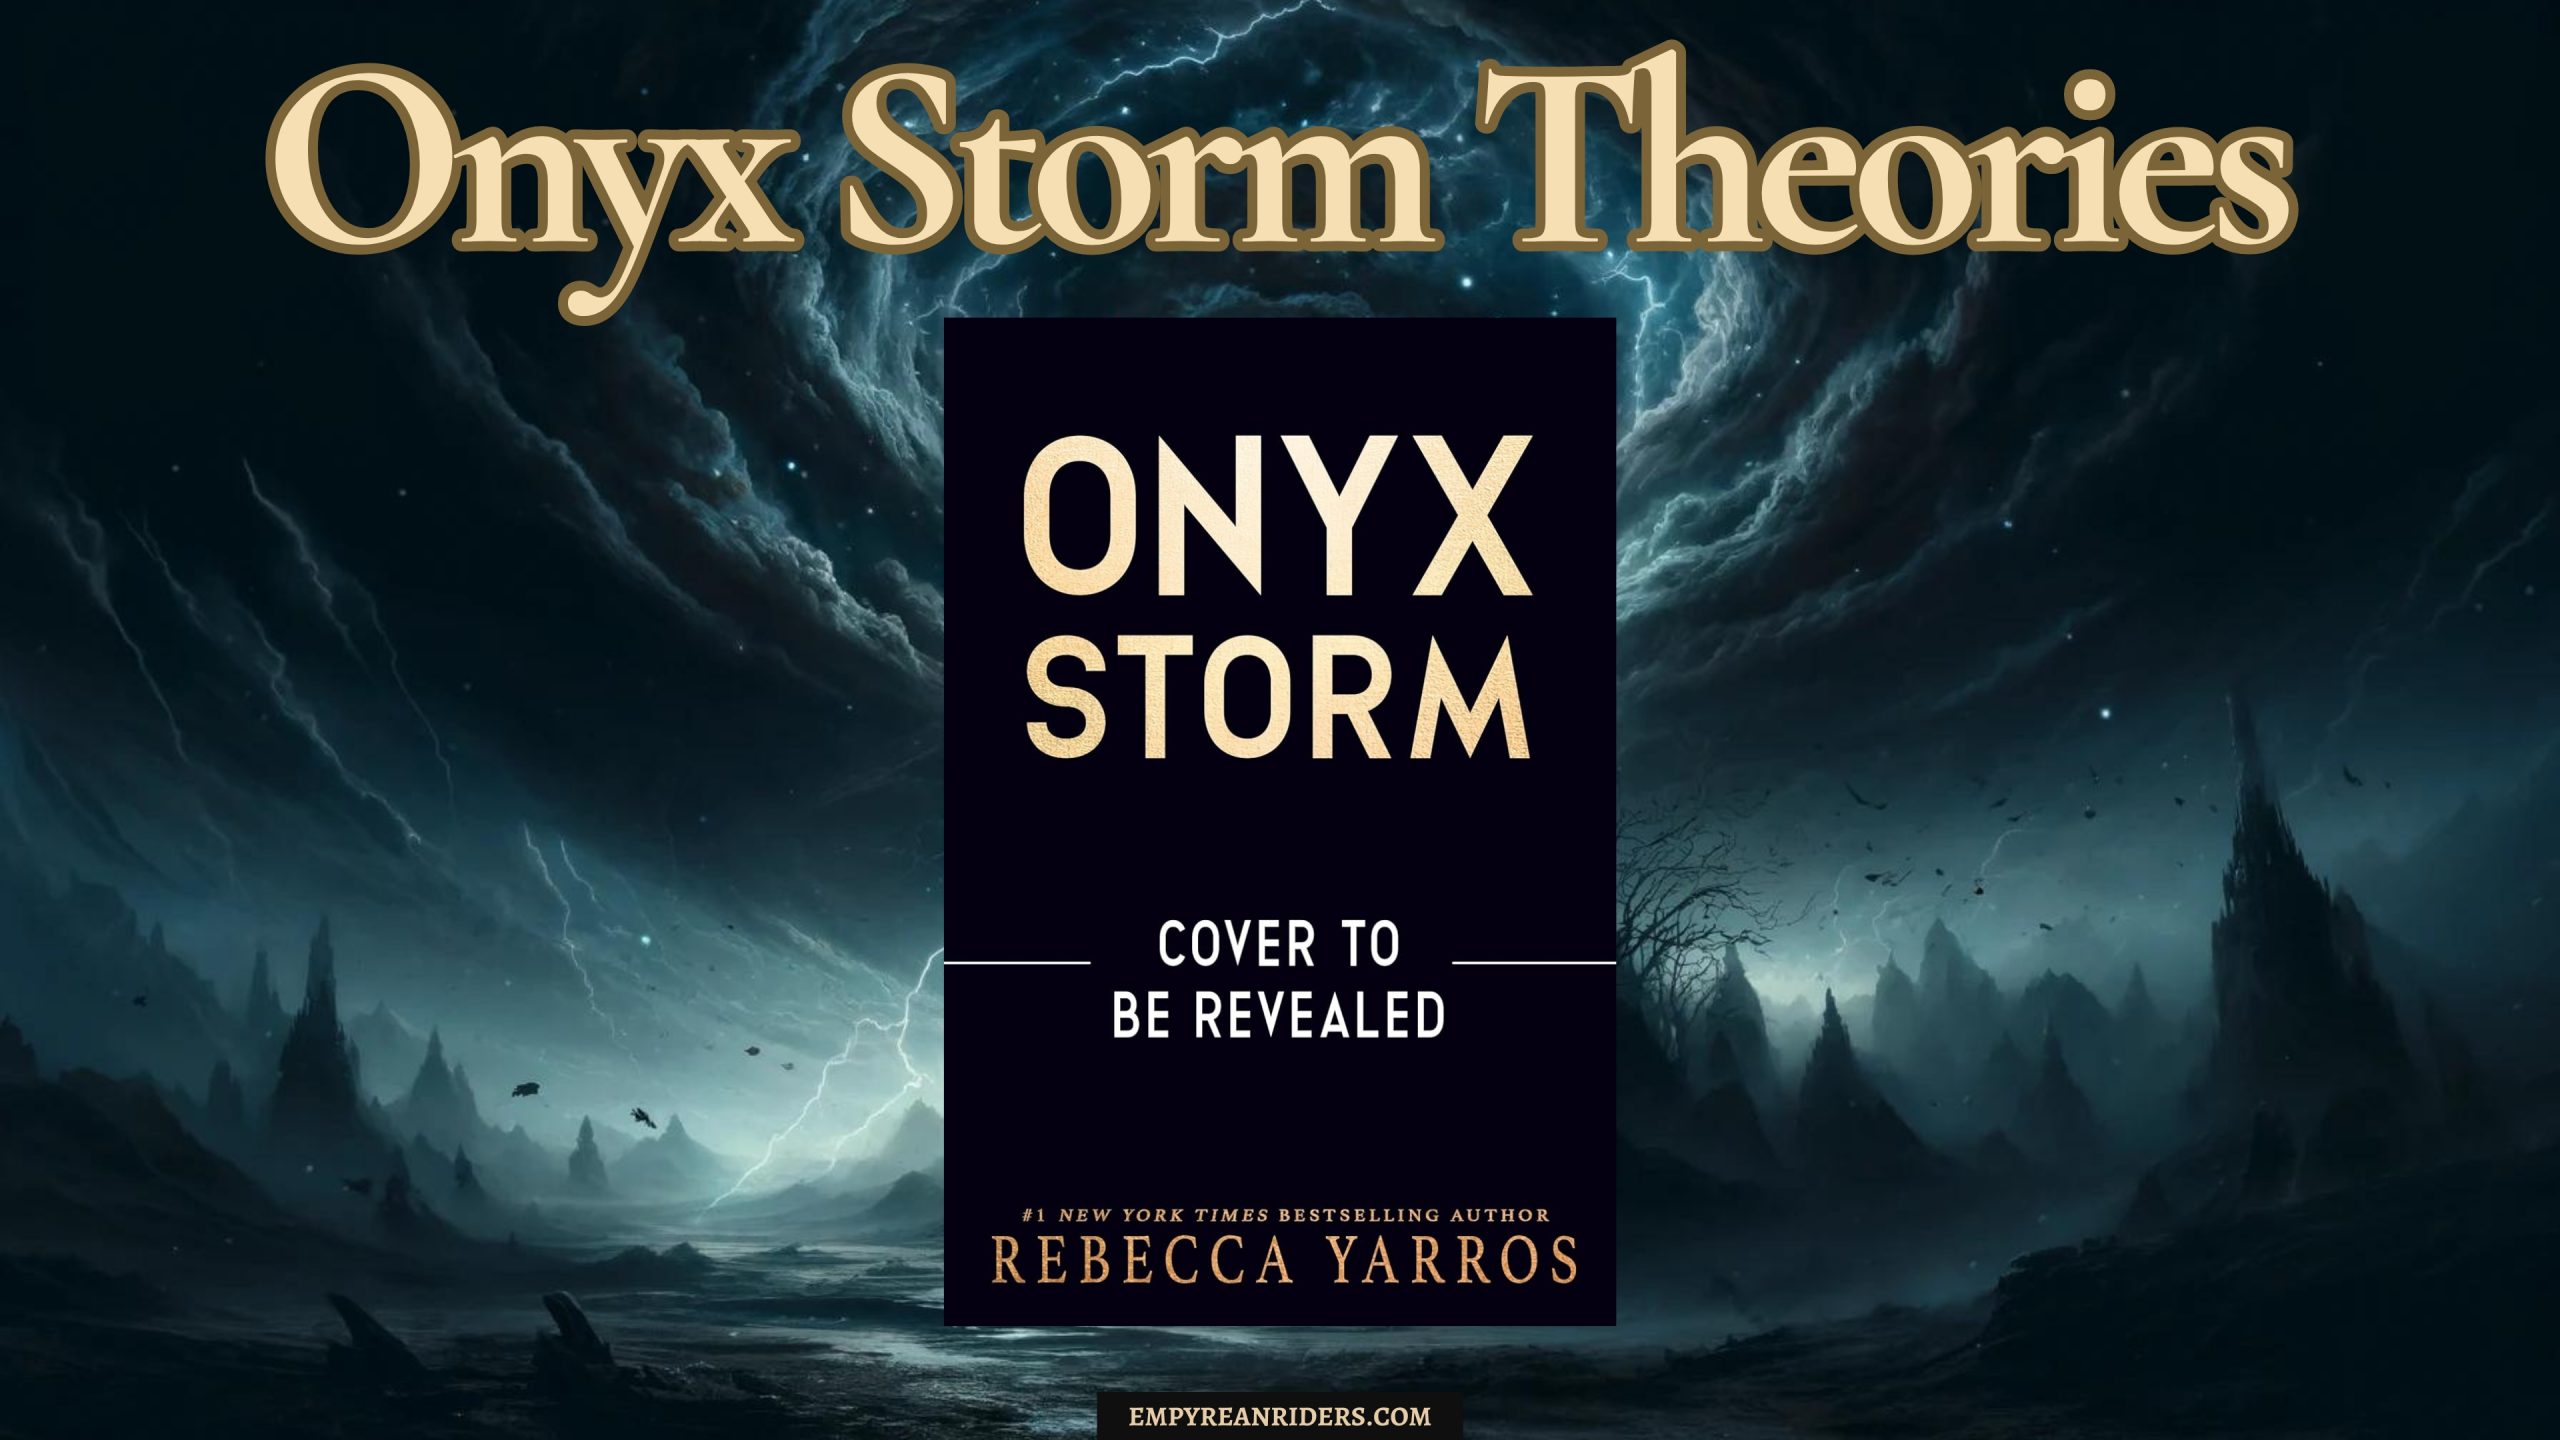 Onyx Storm Theories – A complete collection